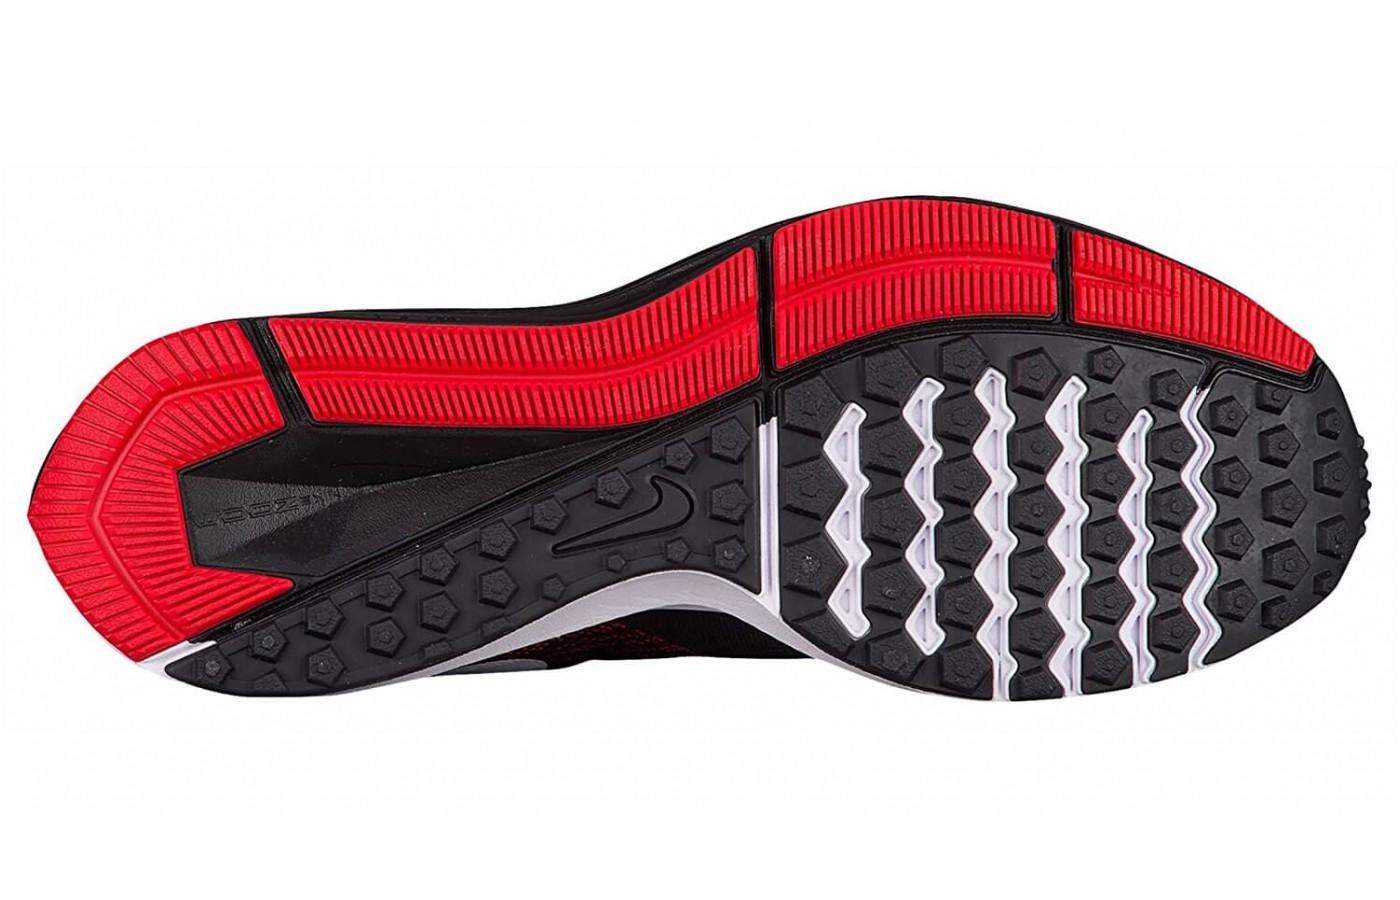 The waffle design of the outsole provides added traction 